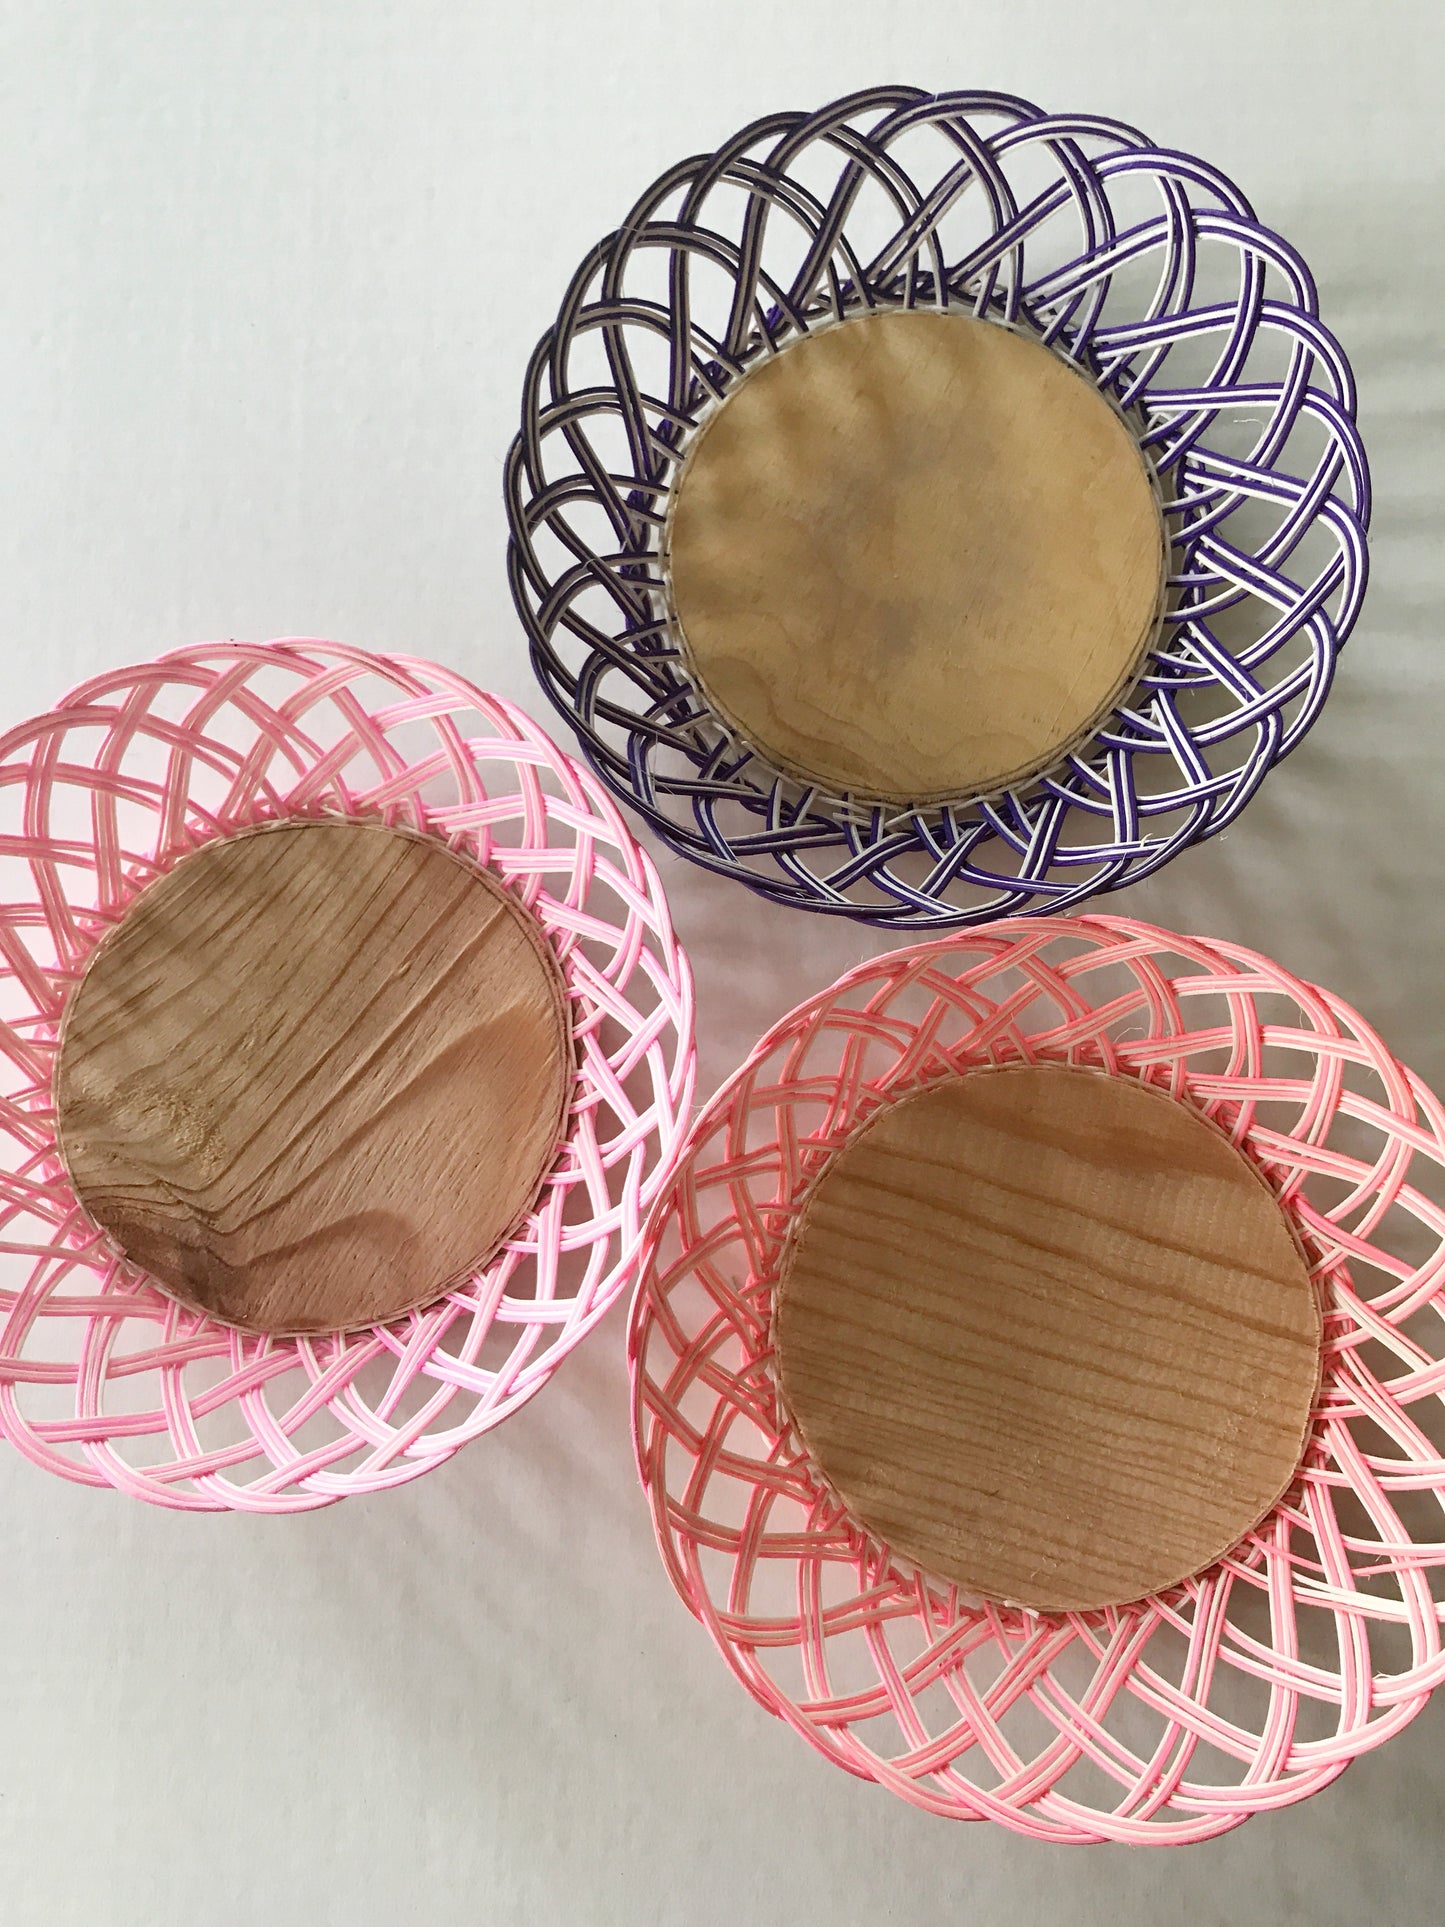 Woven Basket-Assorted Colors